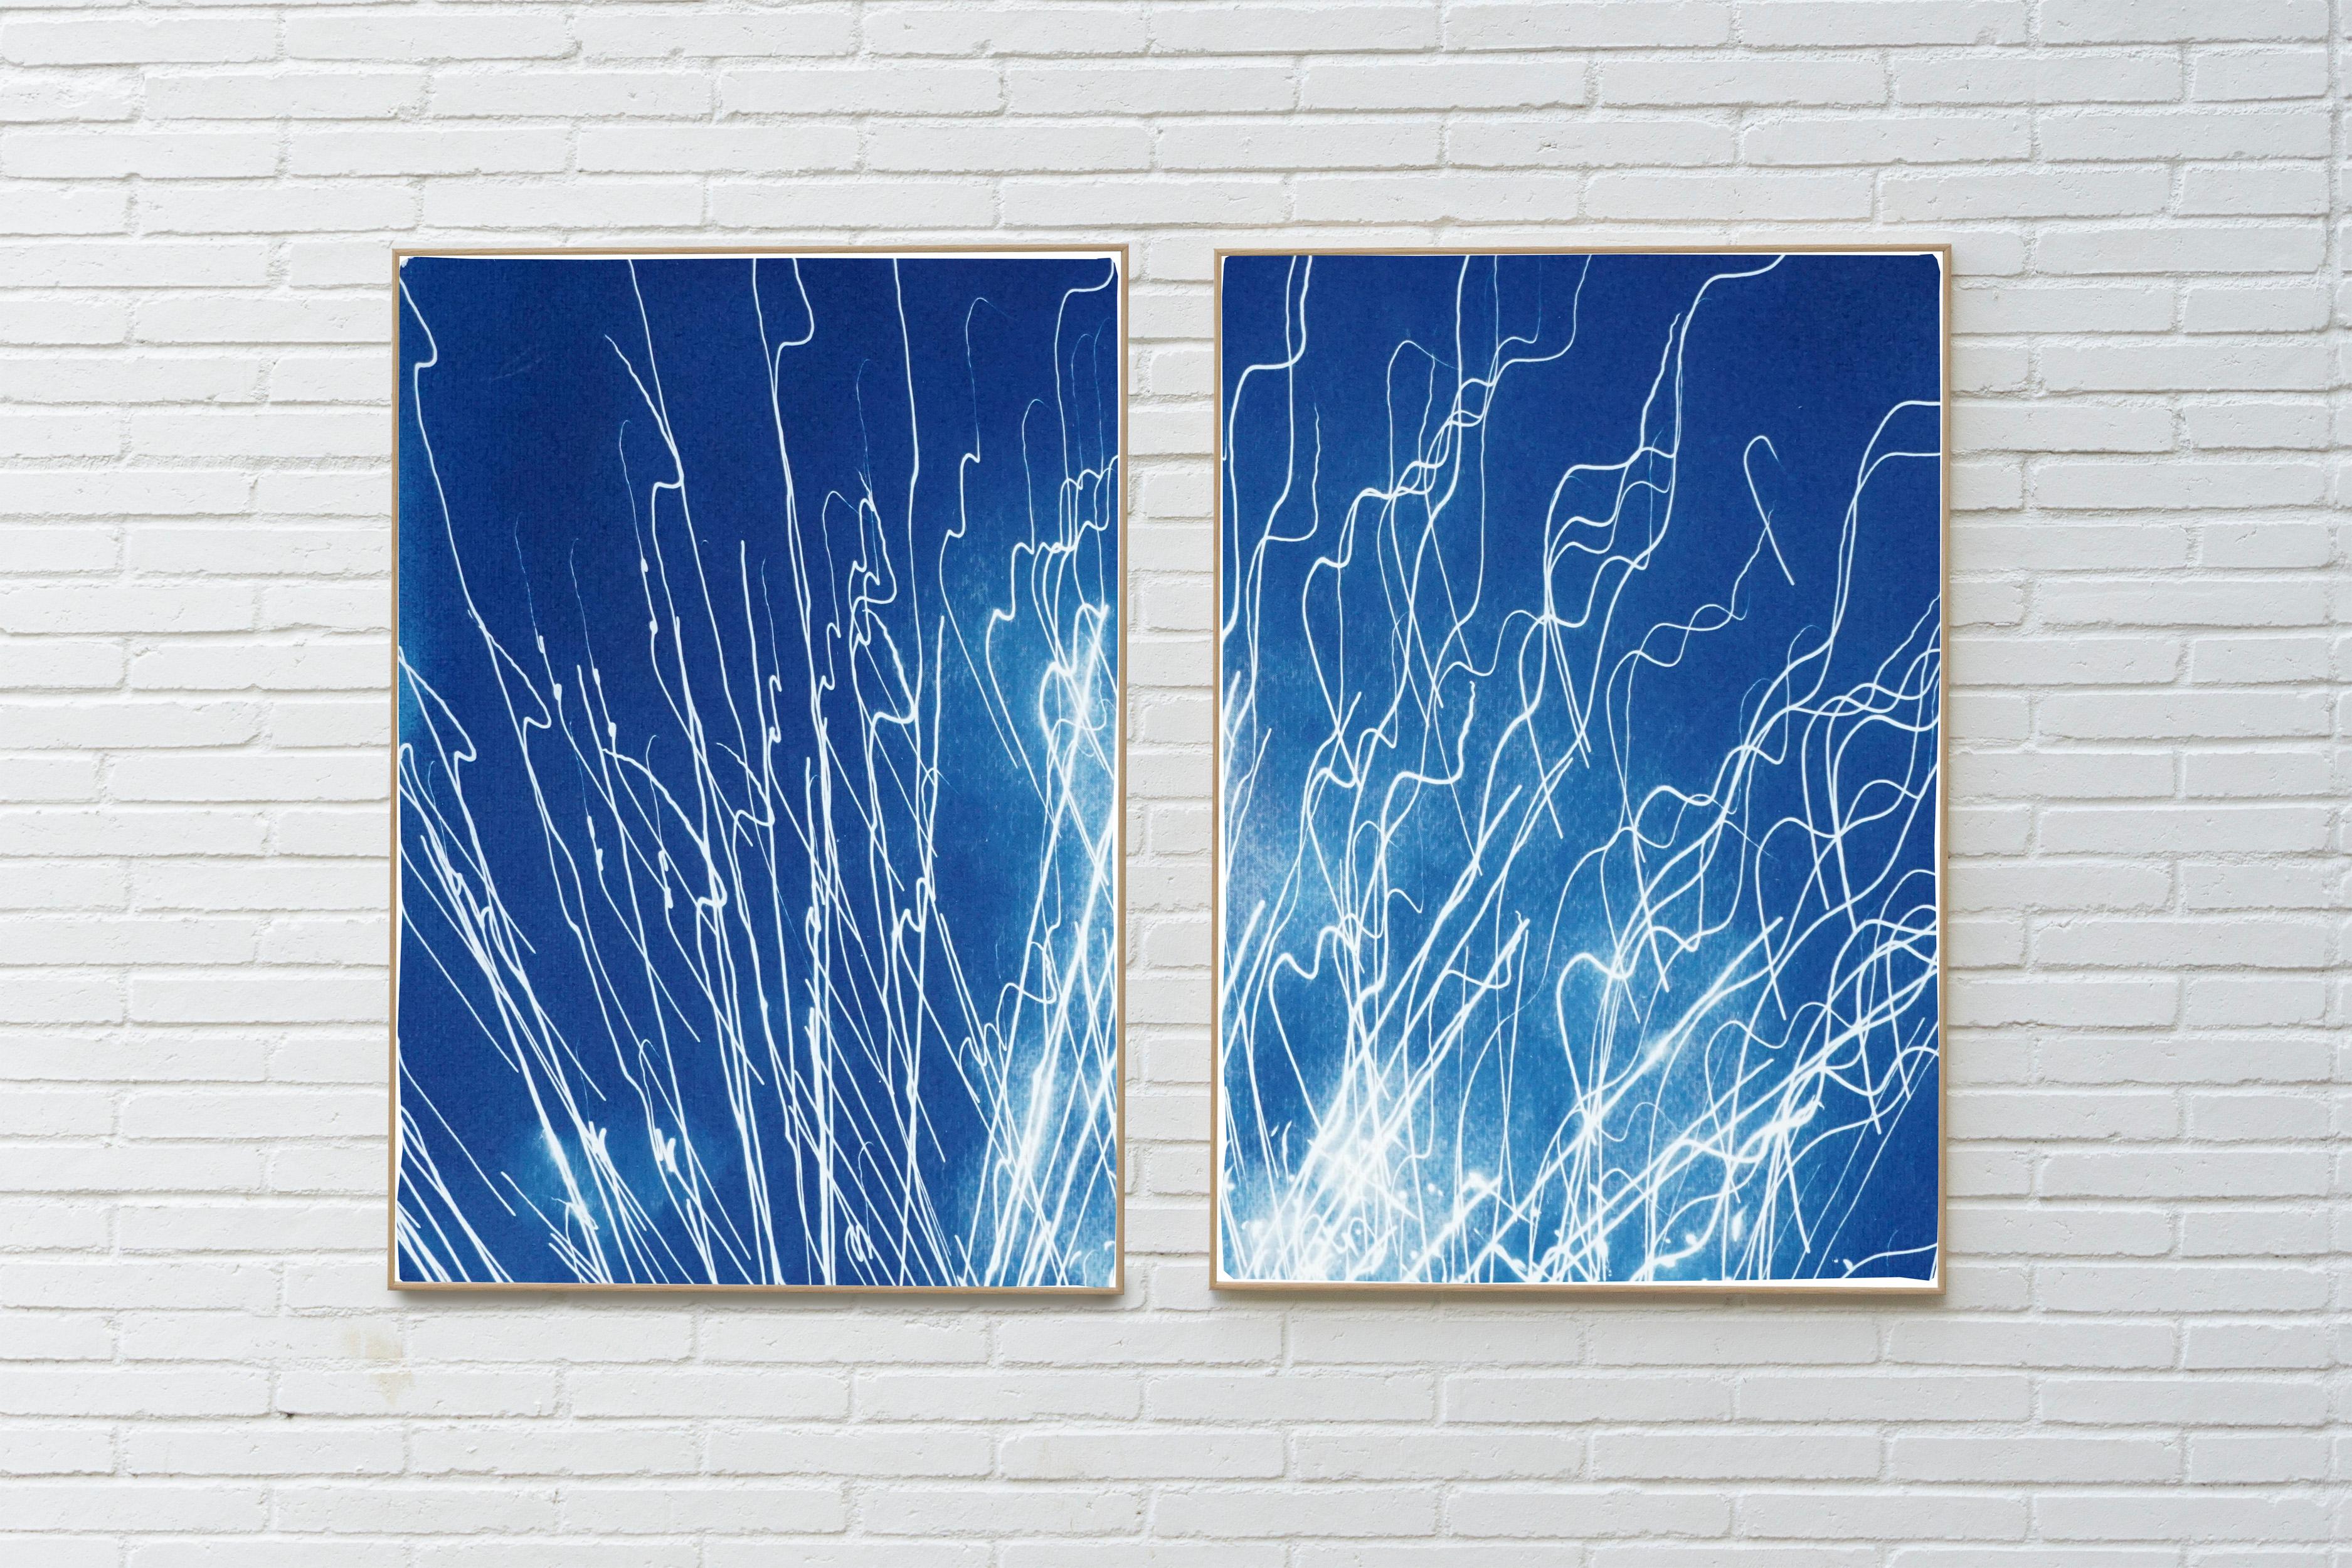 Fireworks Lights in Sky Blue Diptych, Handmade Cyanotype on Watercolor Paper,  - Print by Kind of Cyan